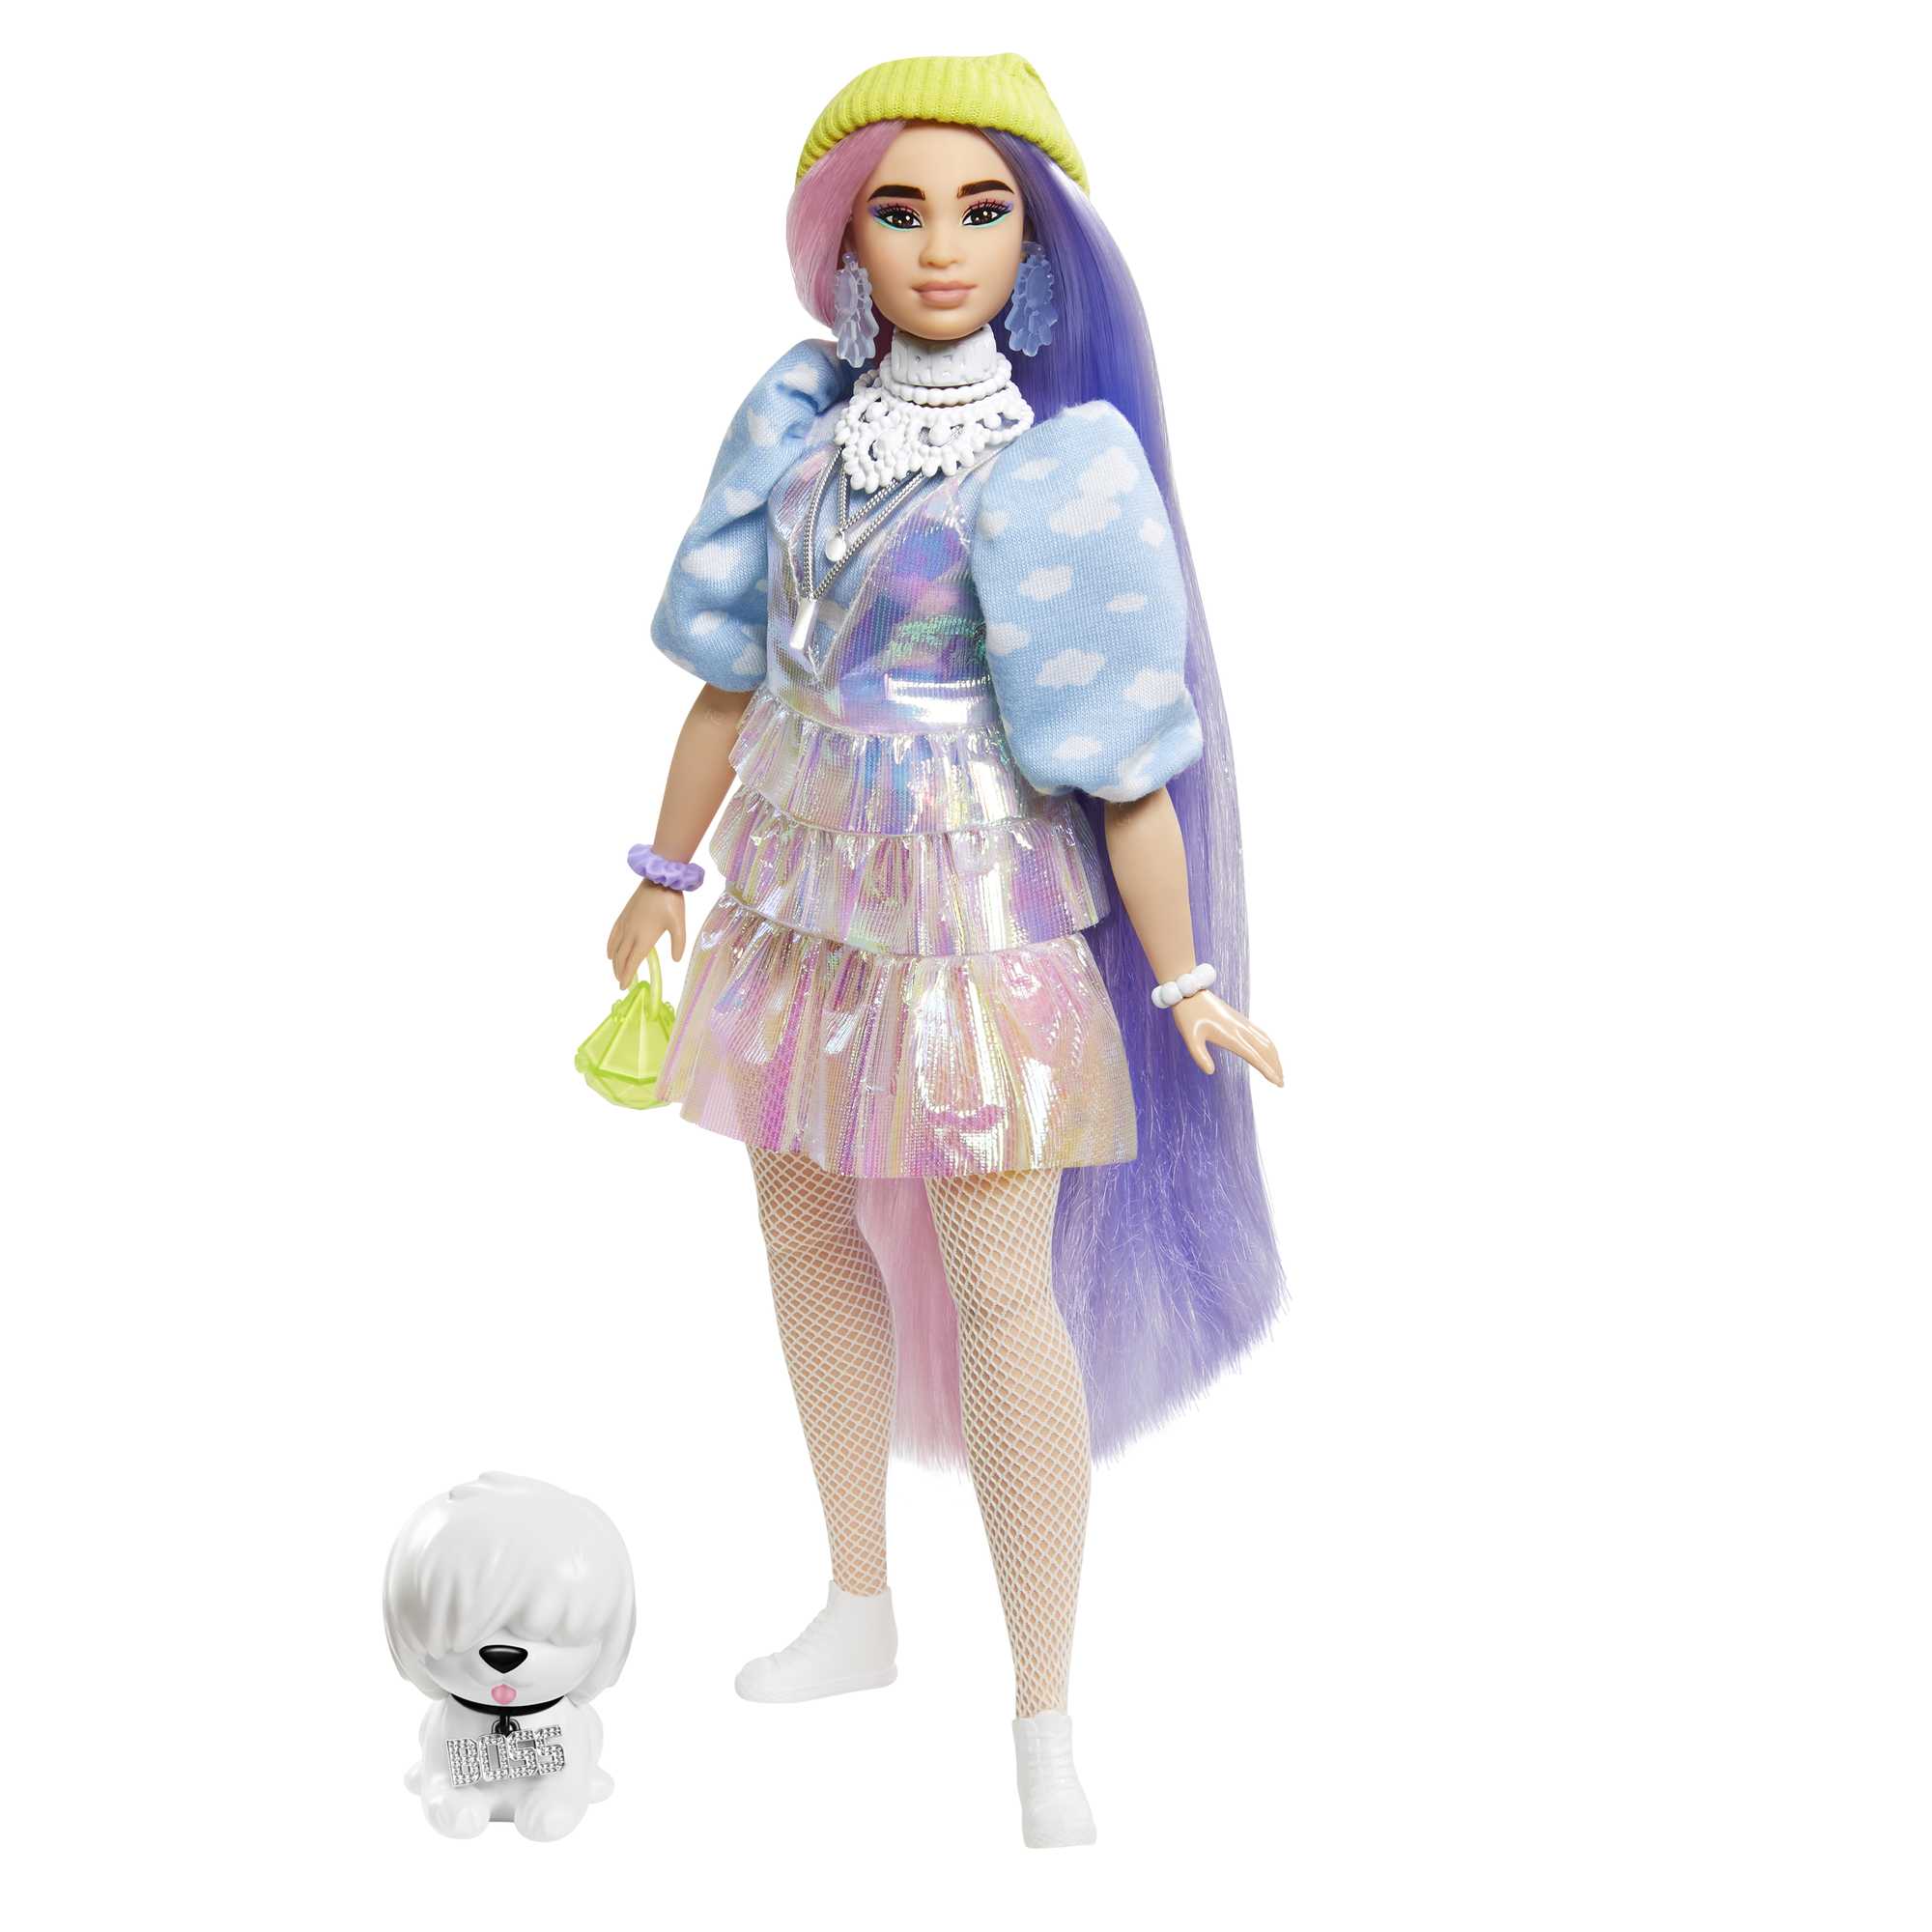 Barbie Extra Fashion Doll with Shimmery Look, Pink & Purple Fantasy Hair, Accessories & Pet - image 7 of 8